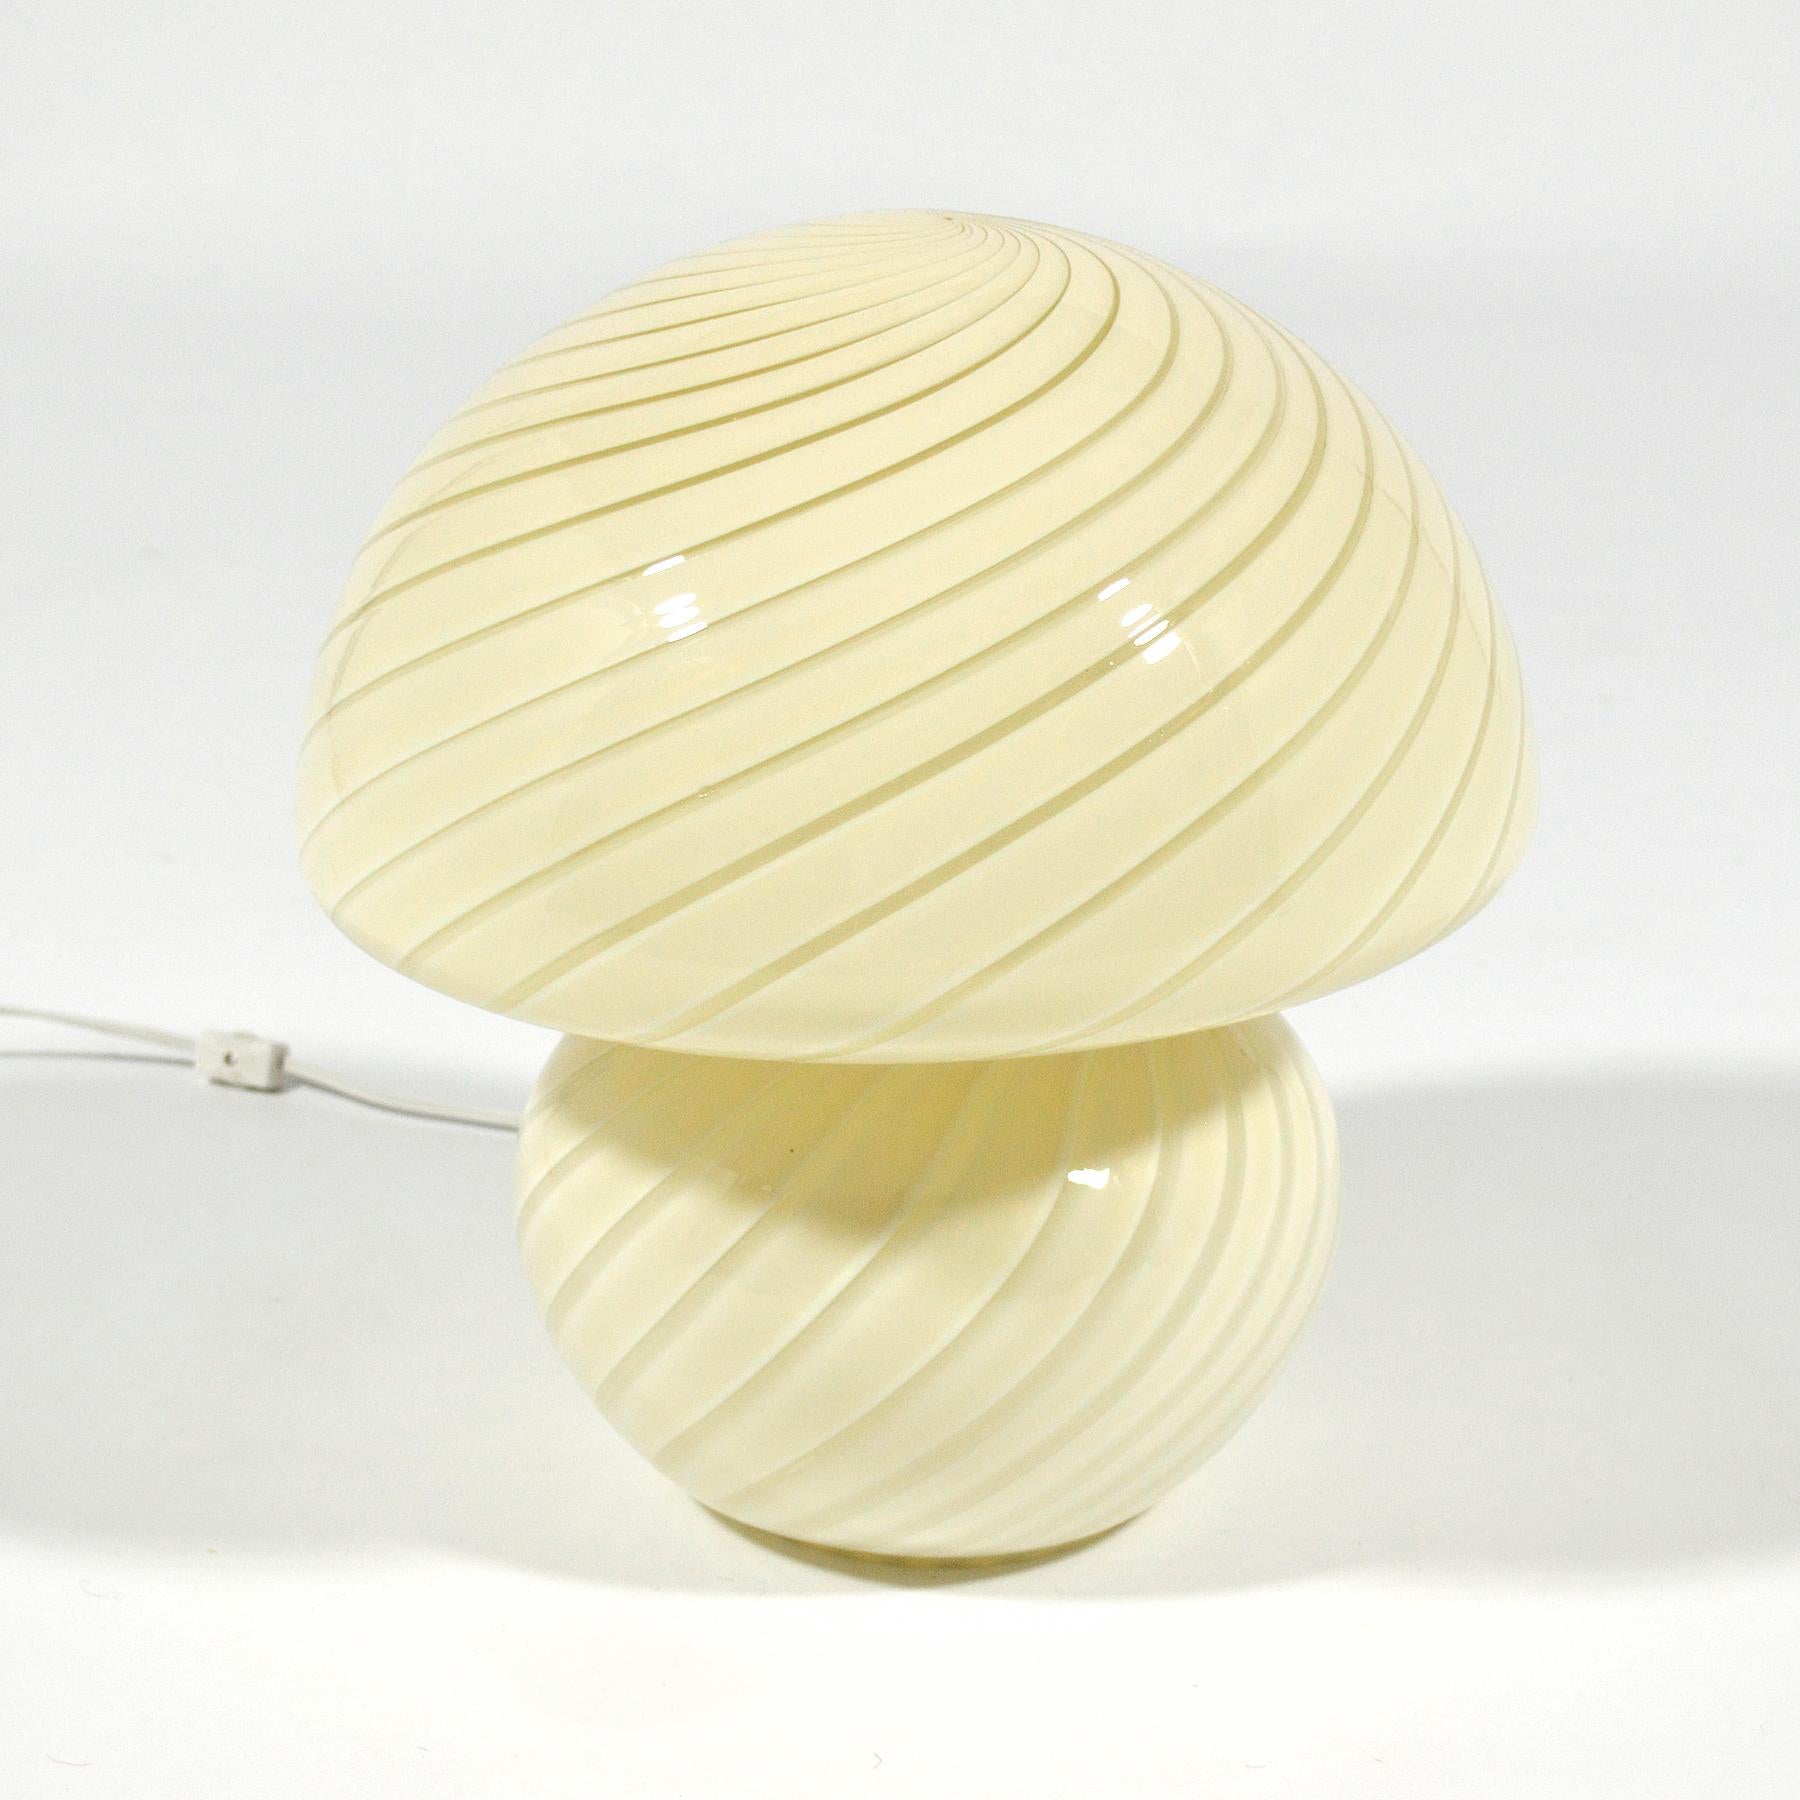 A delightful design, this Murano swirl glass table lamp attributed to the Vetri Murano studio has an exaggerated mushroom shape in glass with a spiral pattern of ivory and white.